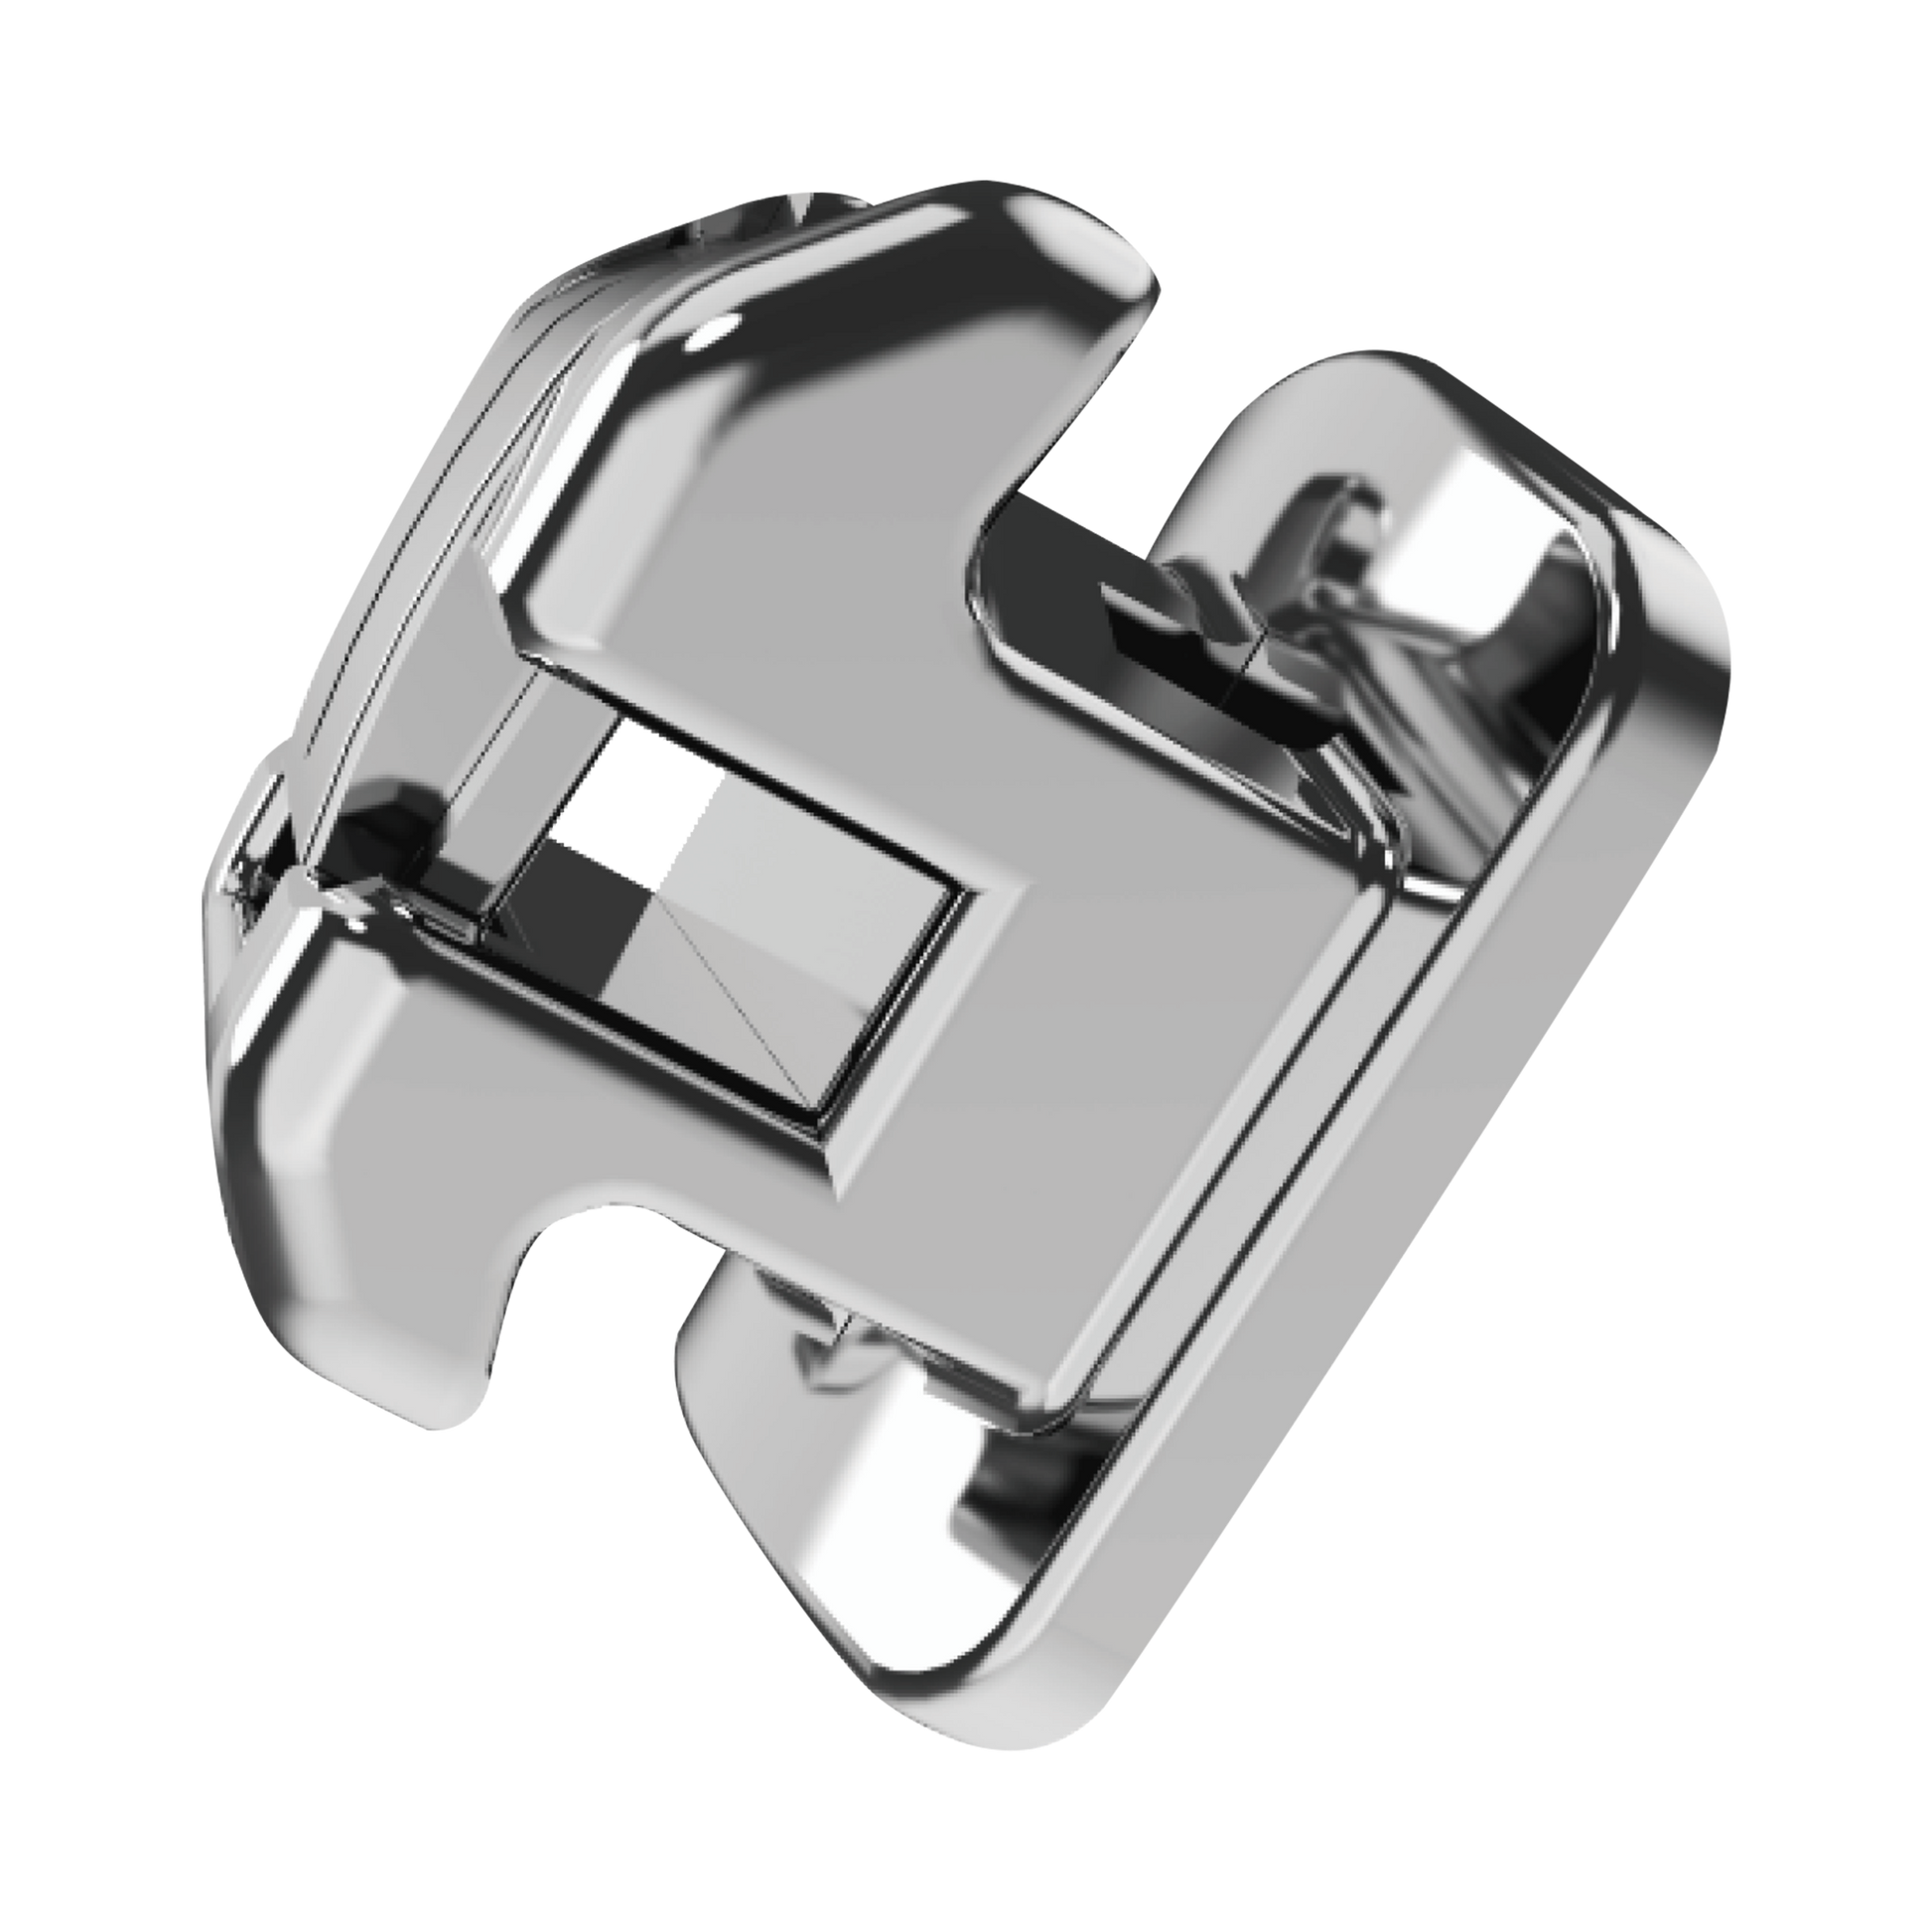 Icon self ligating bracket perfectly rounded edges patient comfort